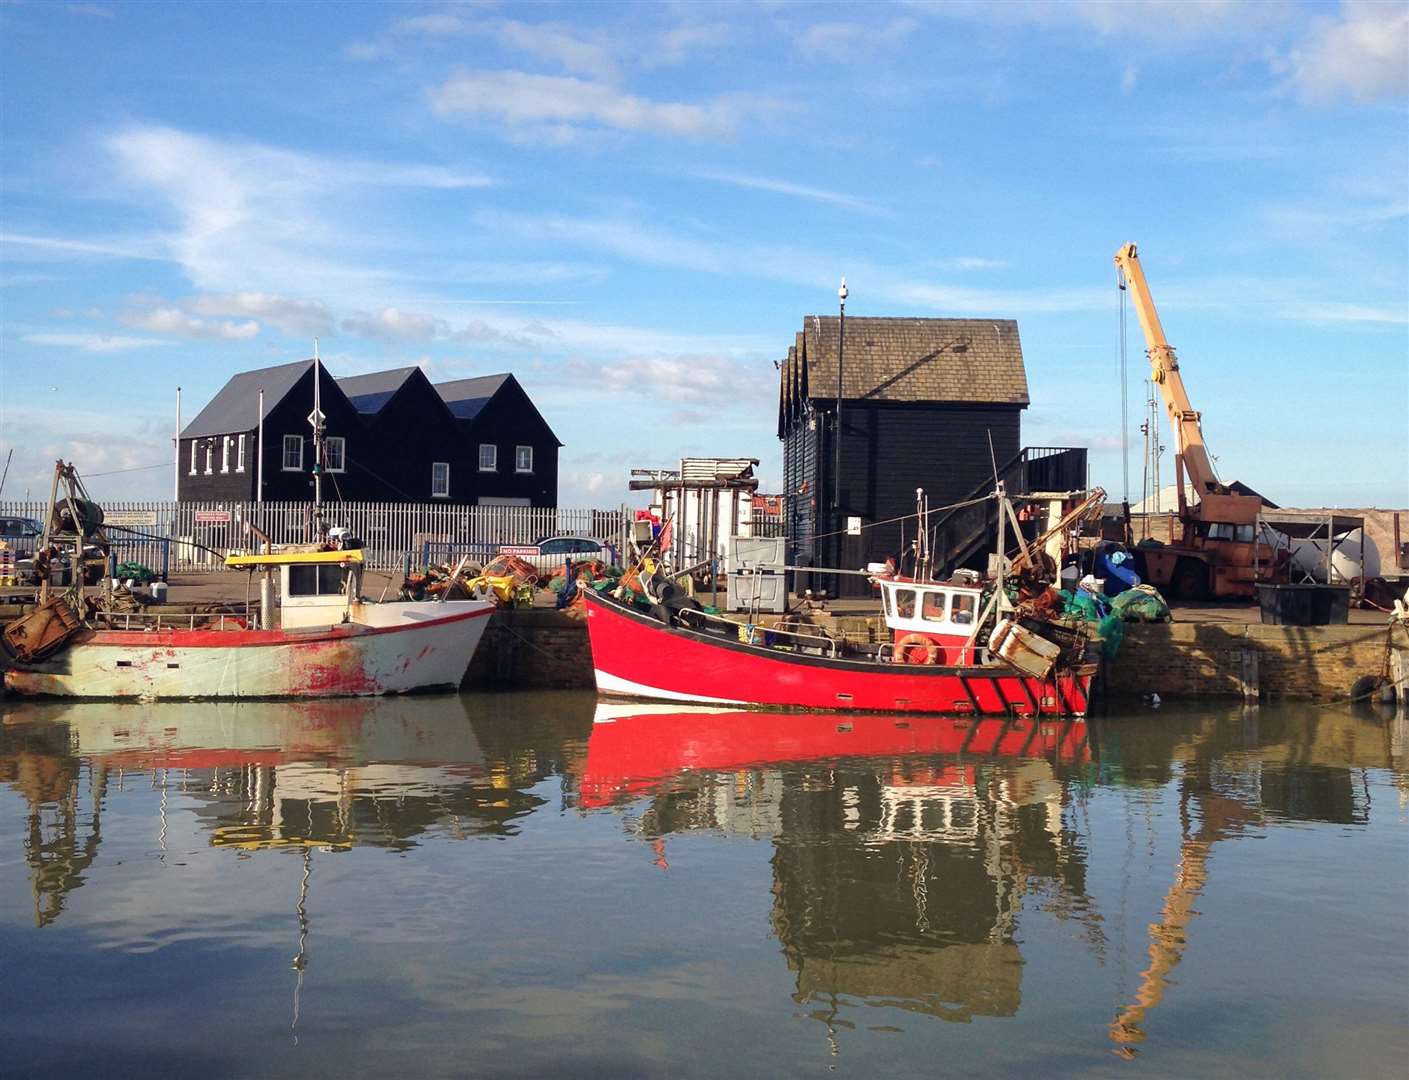 GREAT DAY OUT: Discover Whitstable this summer